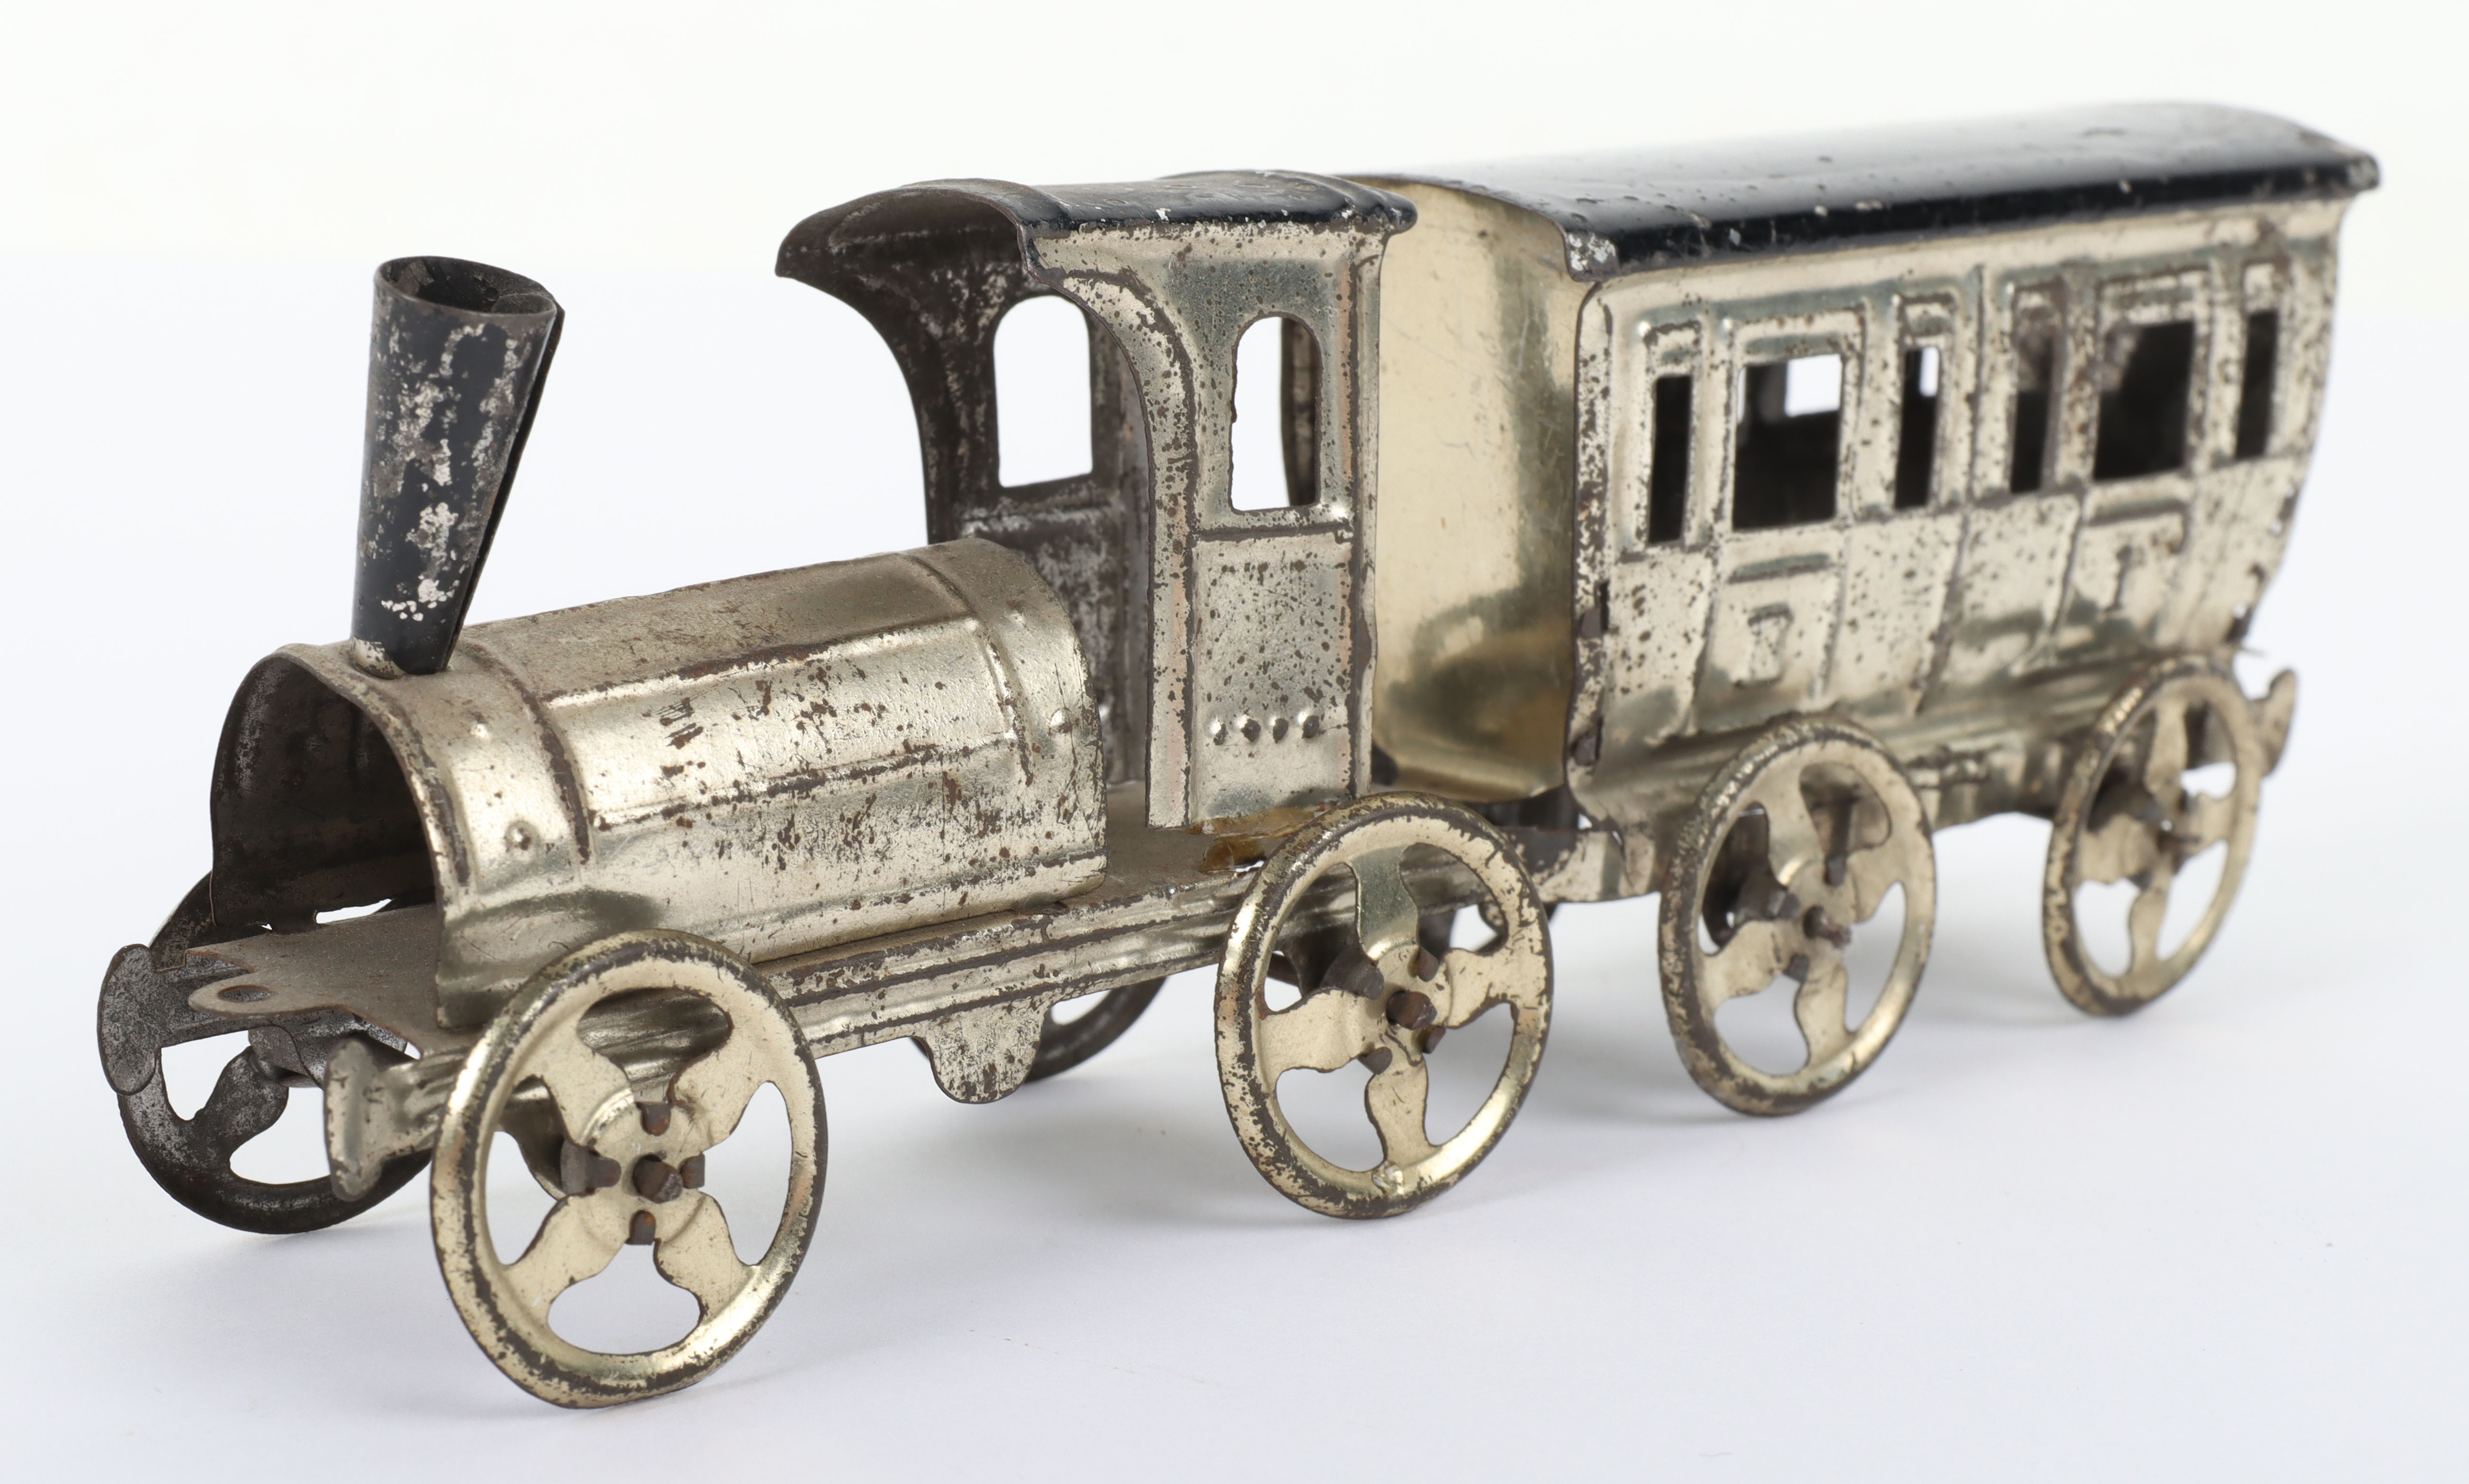 Early Meier pressed tinplate locomotive and carriage penny toy, German circa 1900 - Image 2 of 6